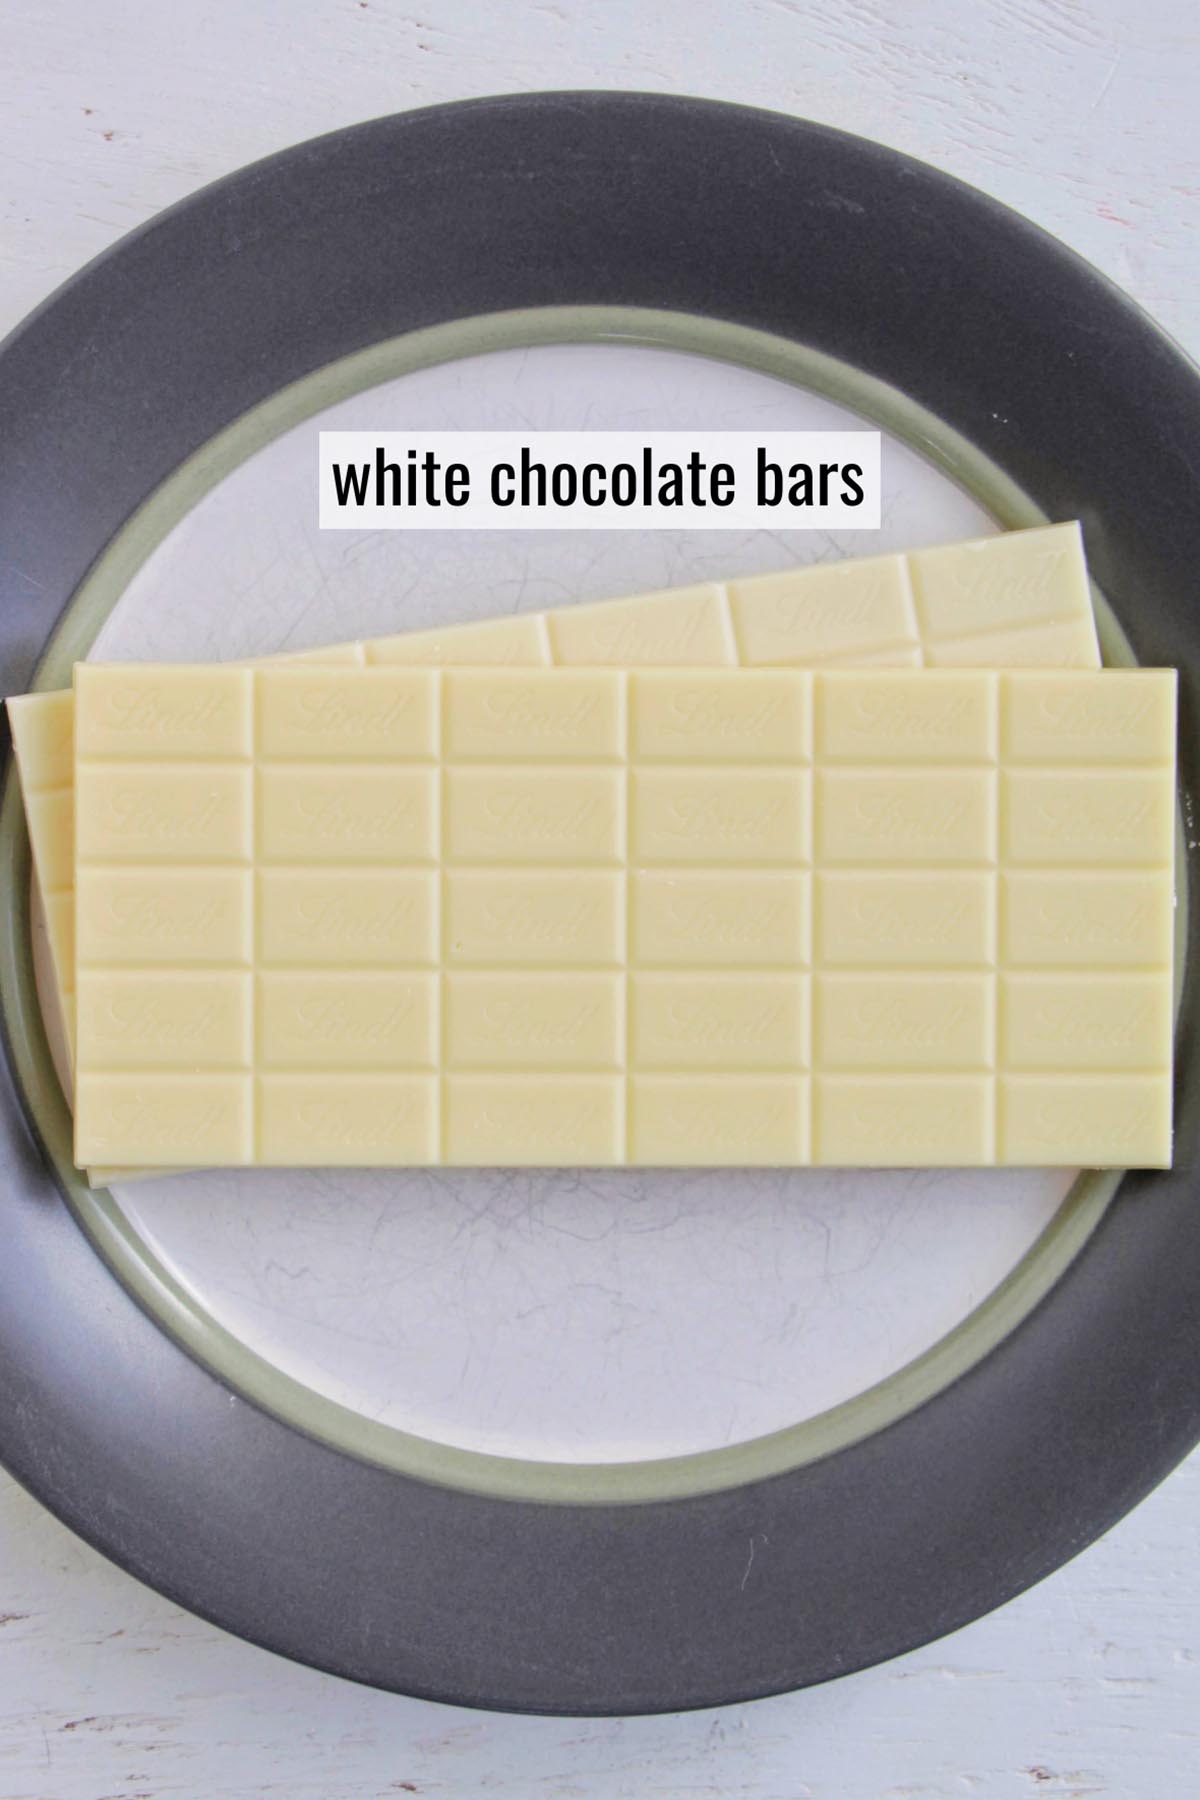 white chocolate bars with label.